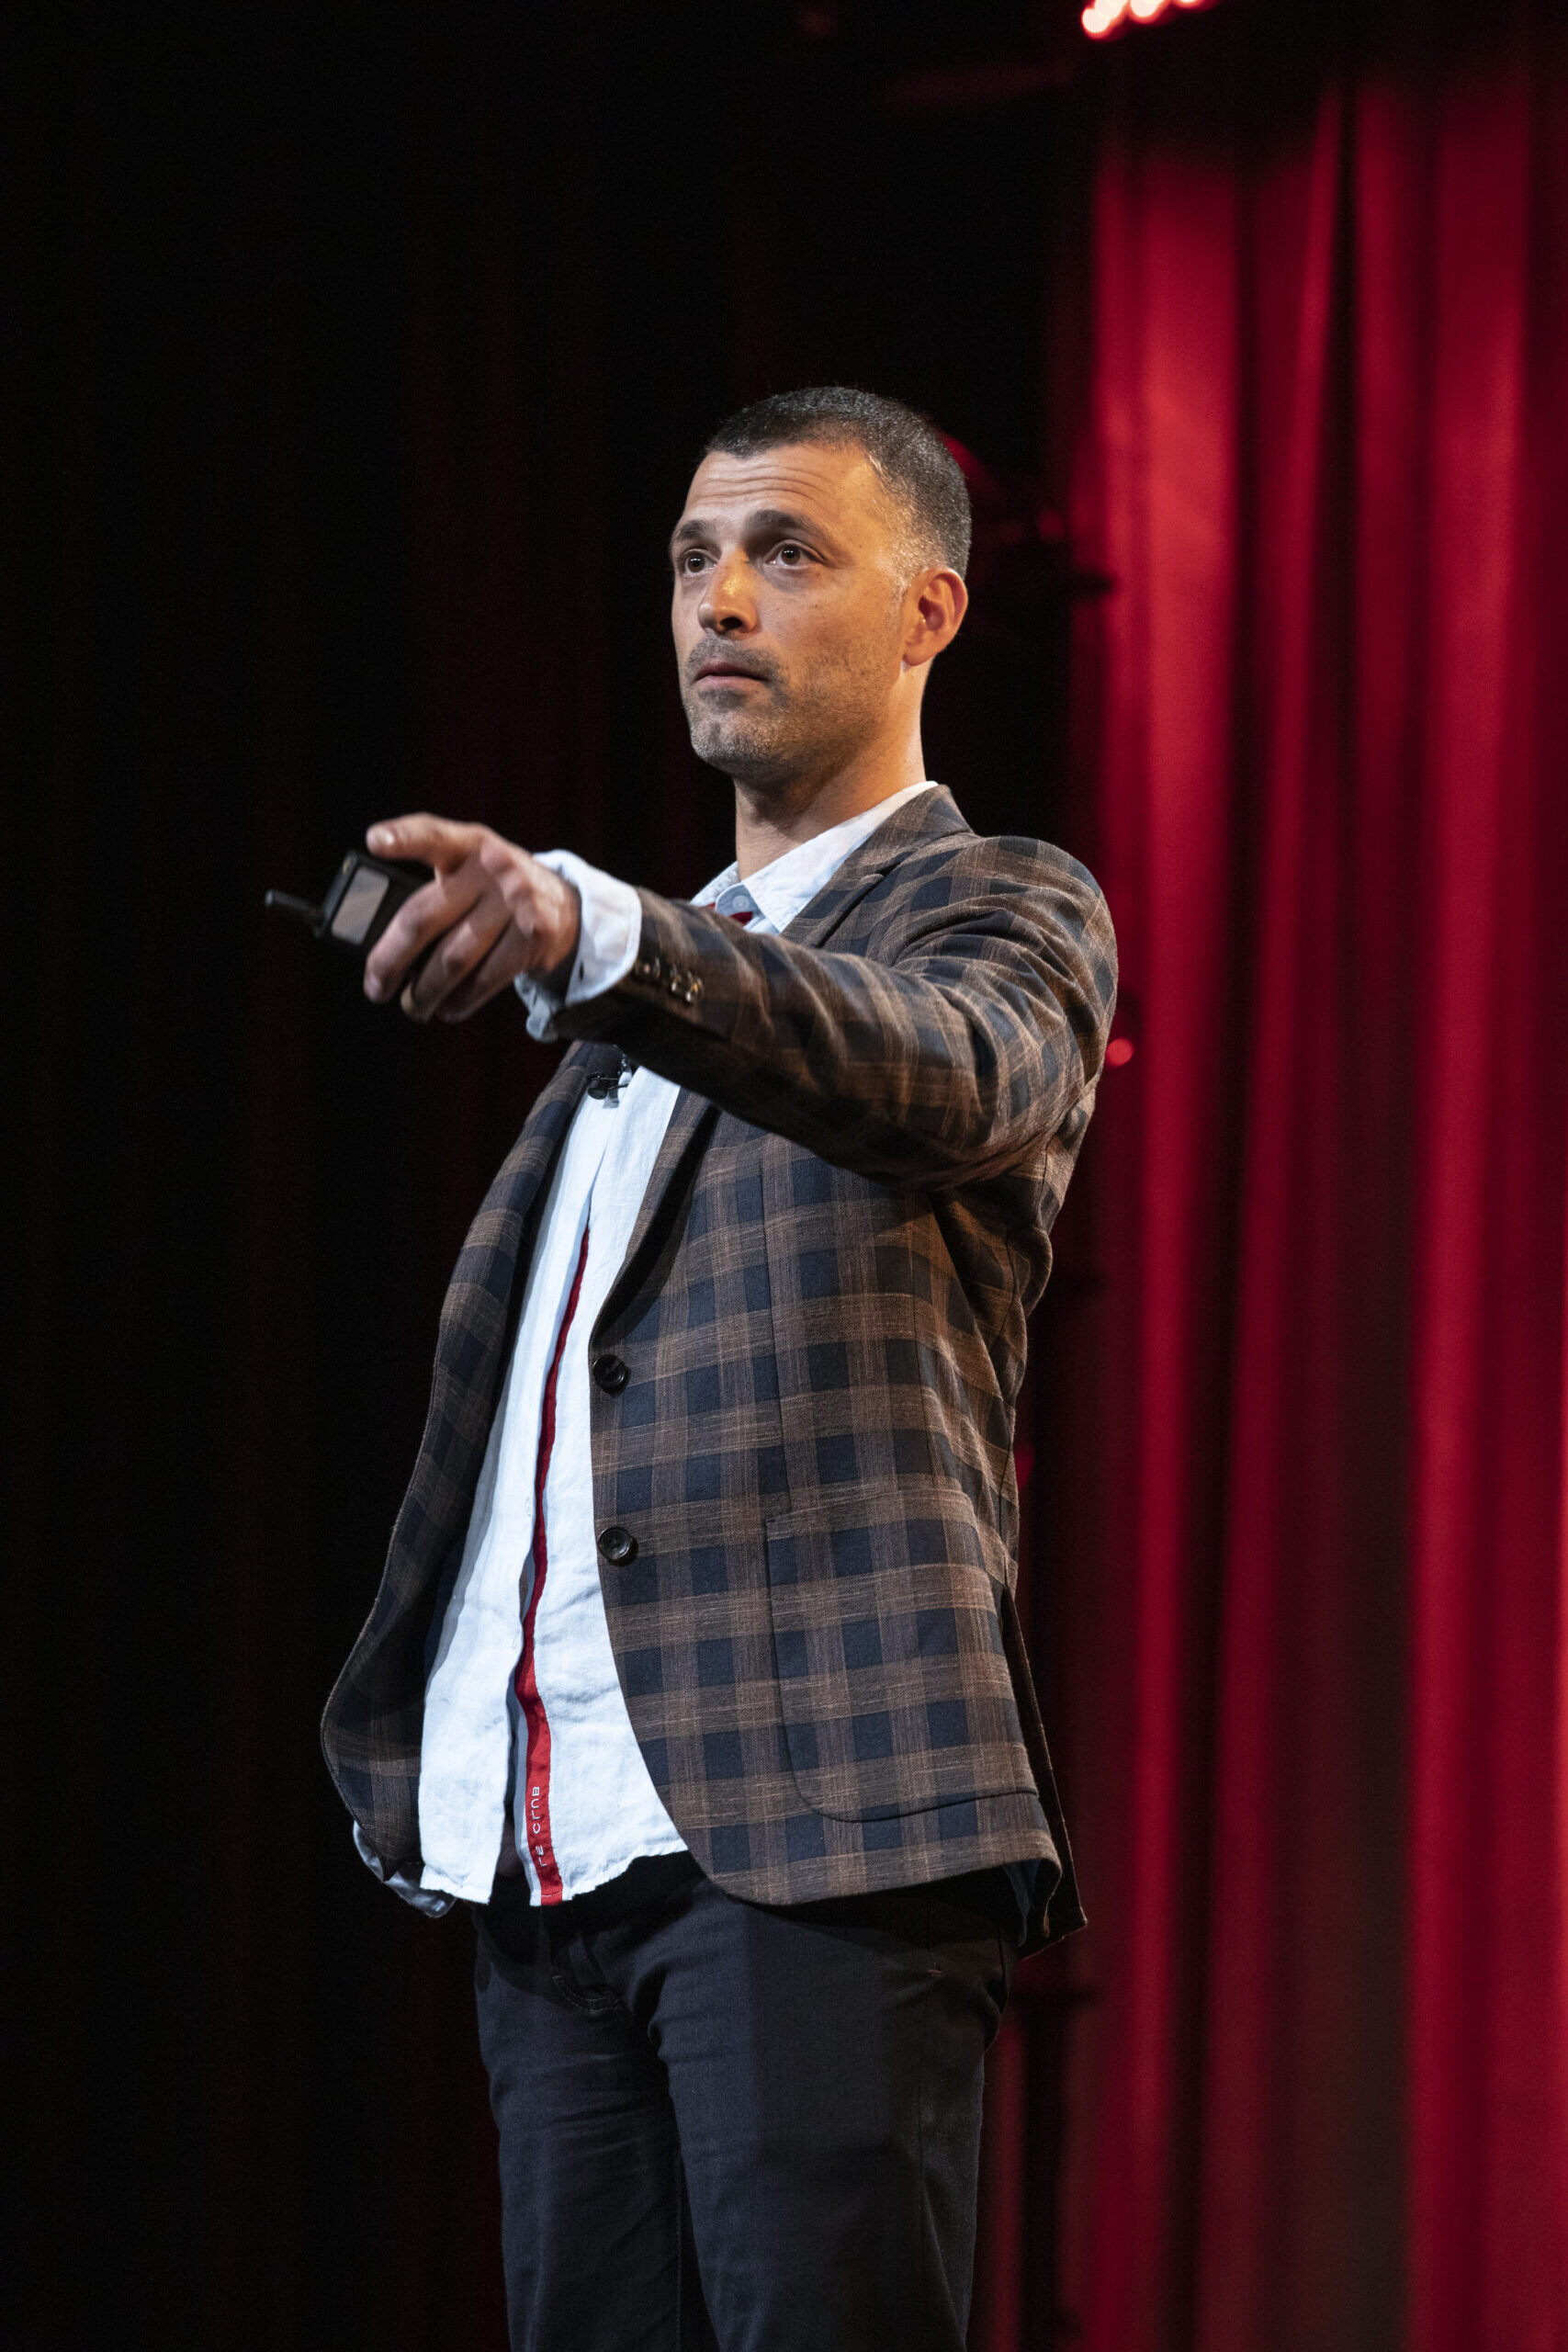 A photograph of Zack Viscomi speaking at SuccessSummit 2022 in front of a red curtain.